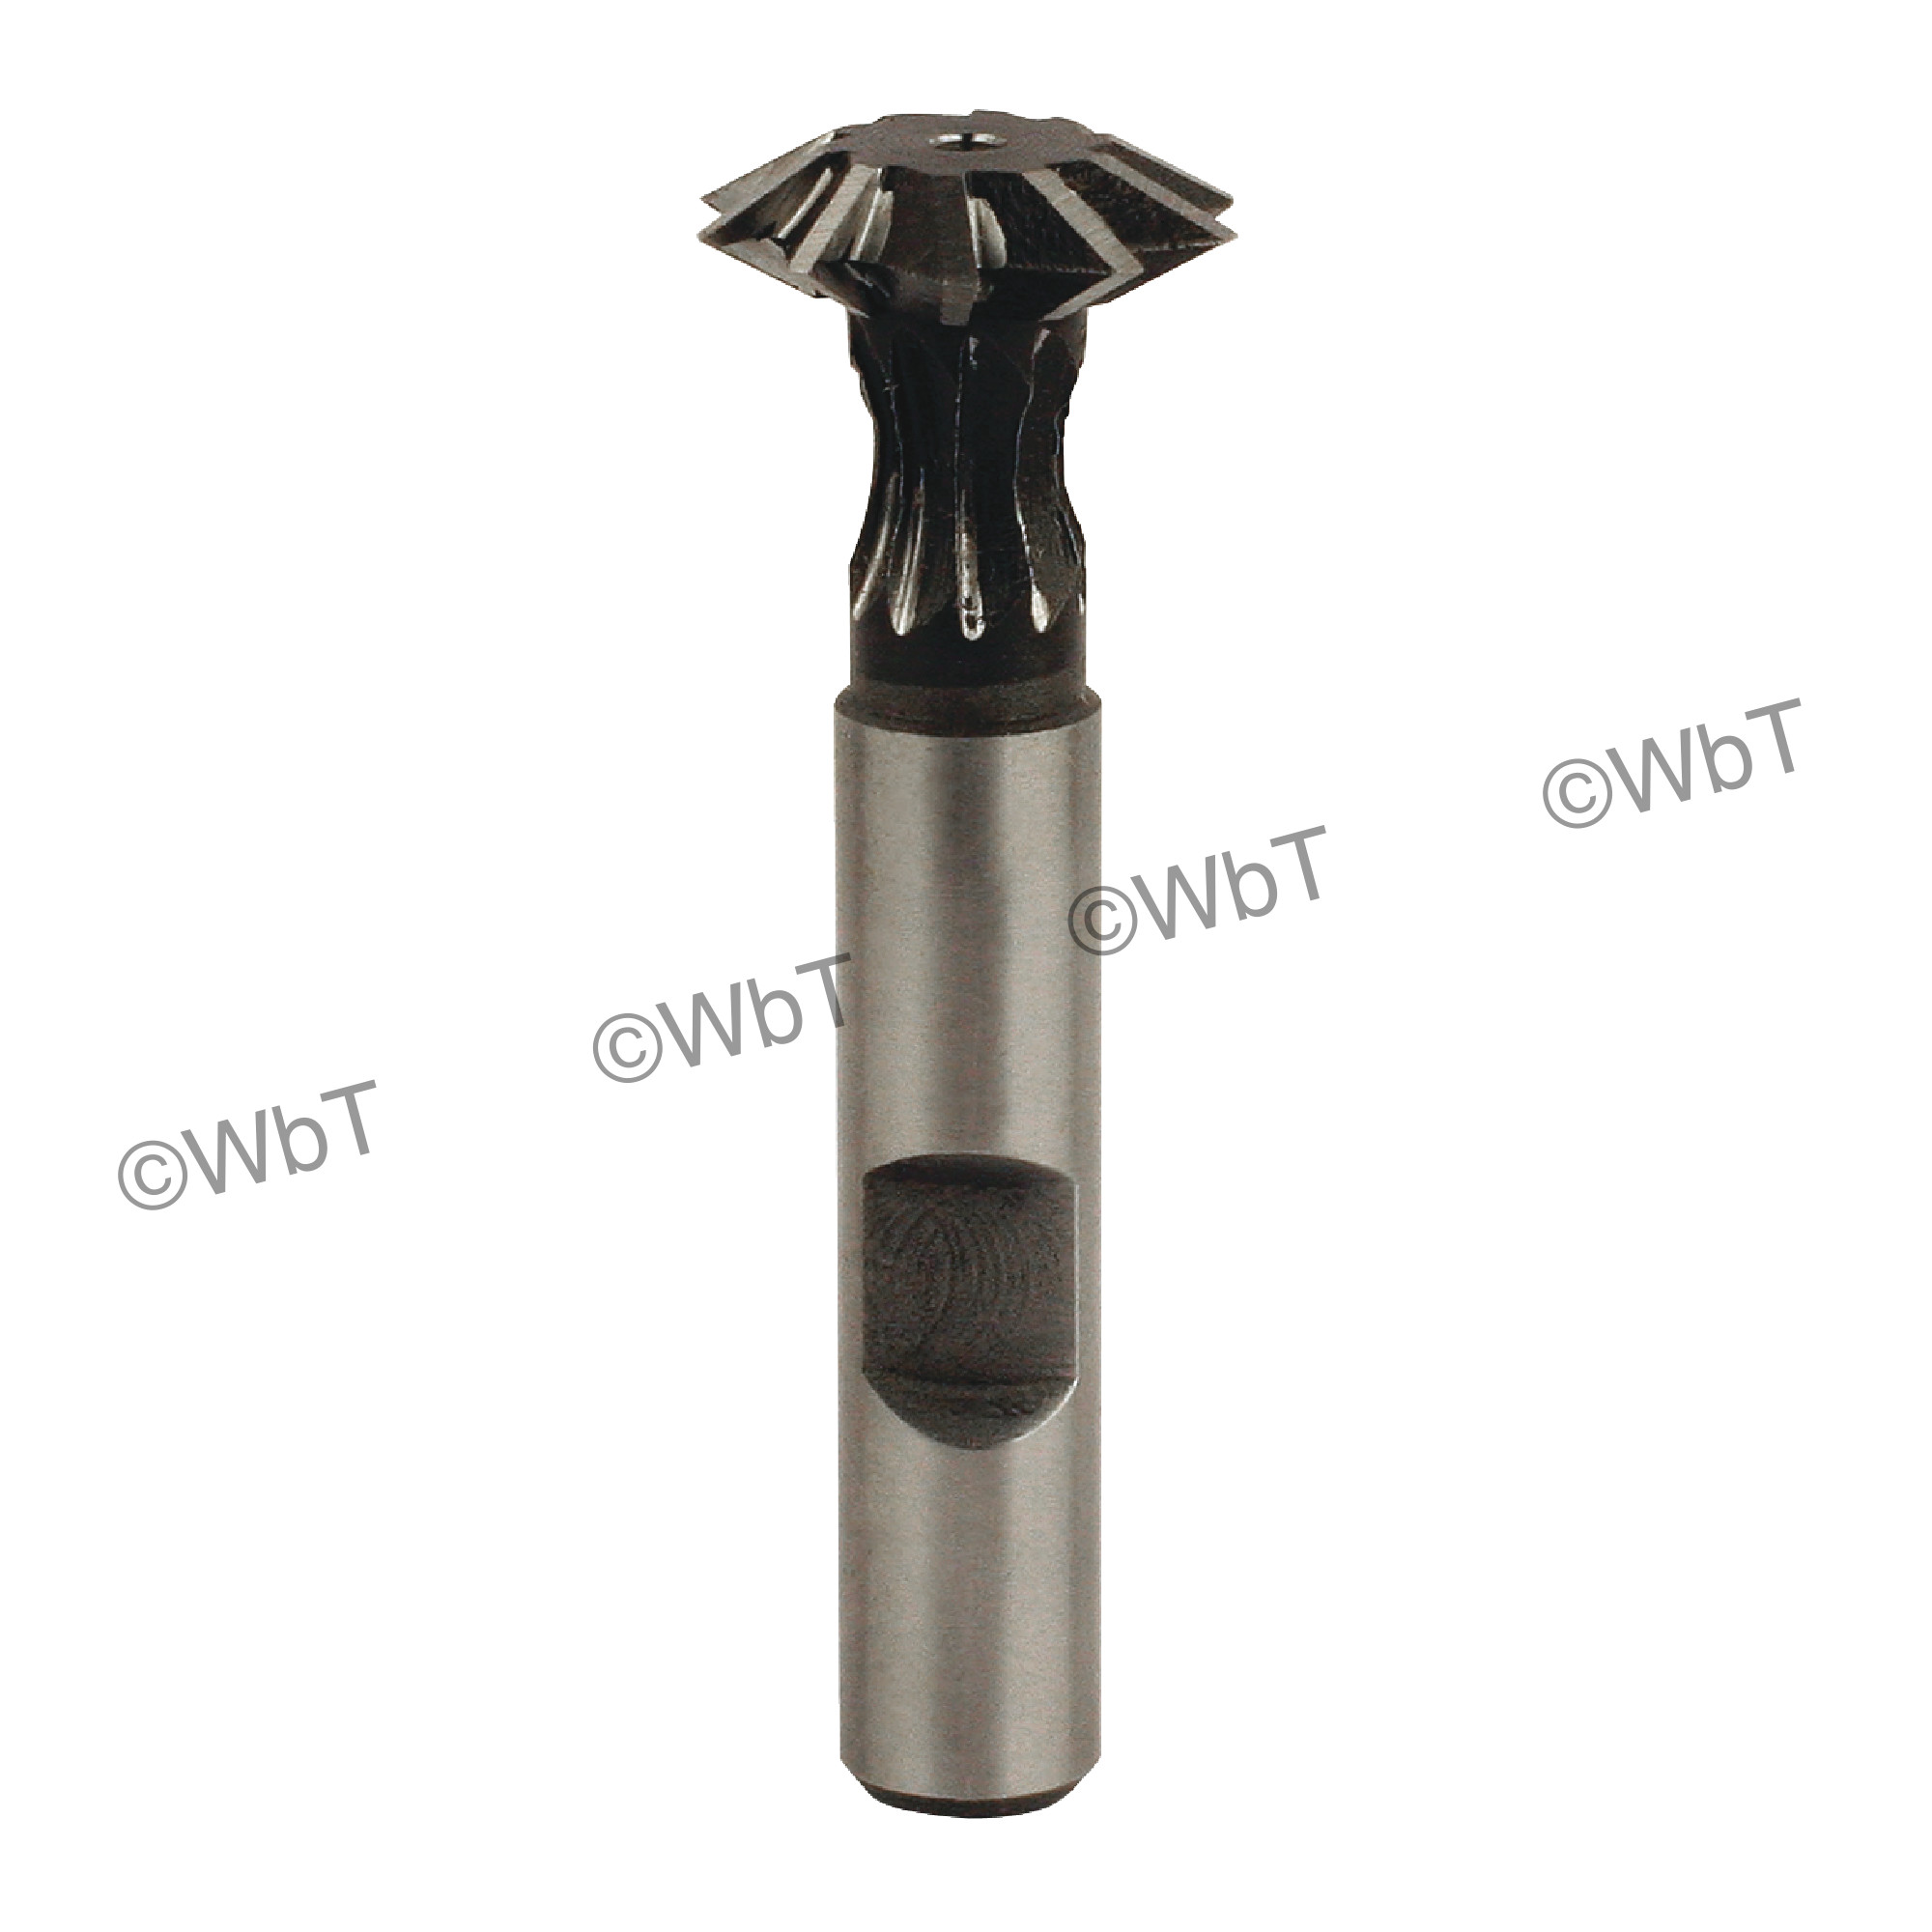 Double Angle Shank Type Cutter